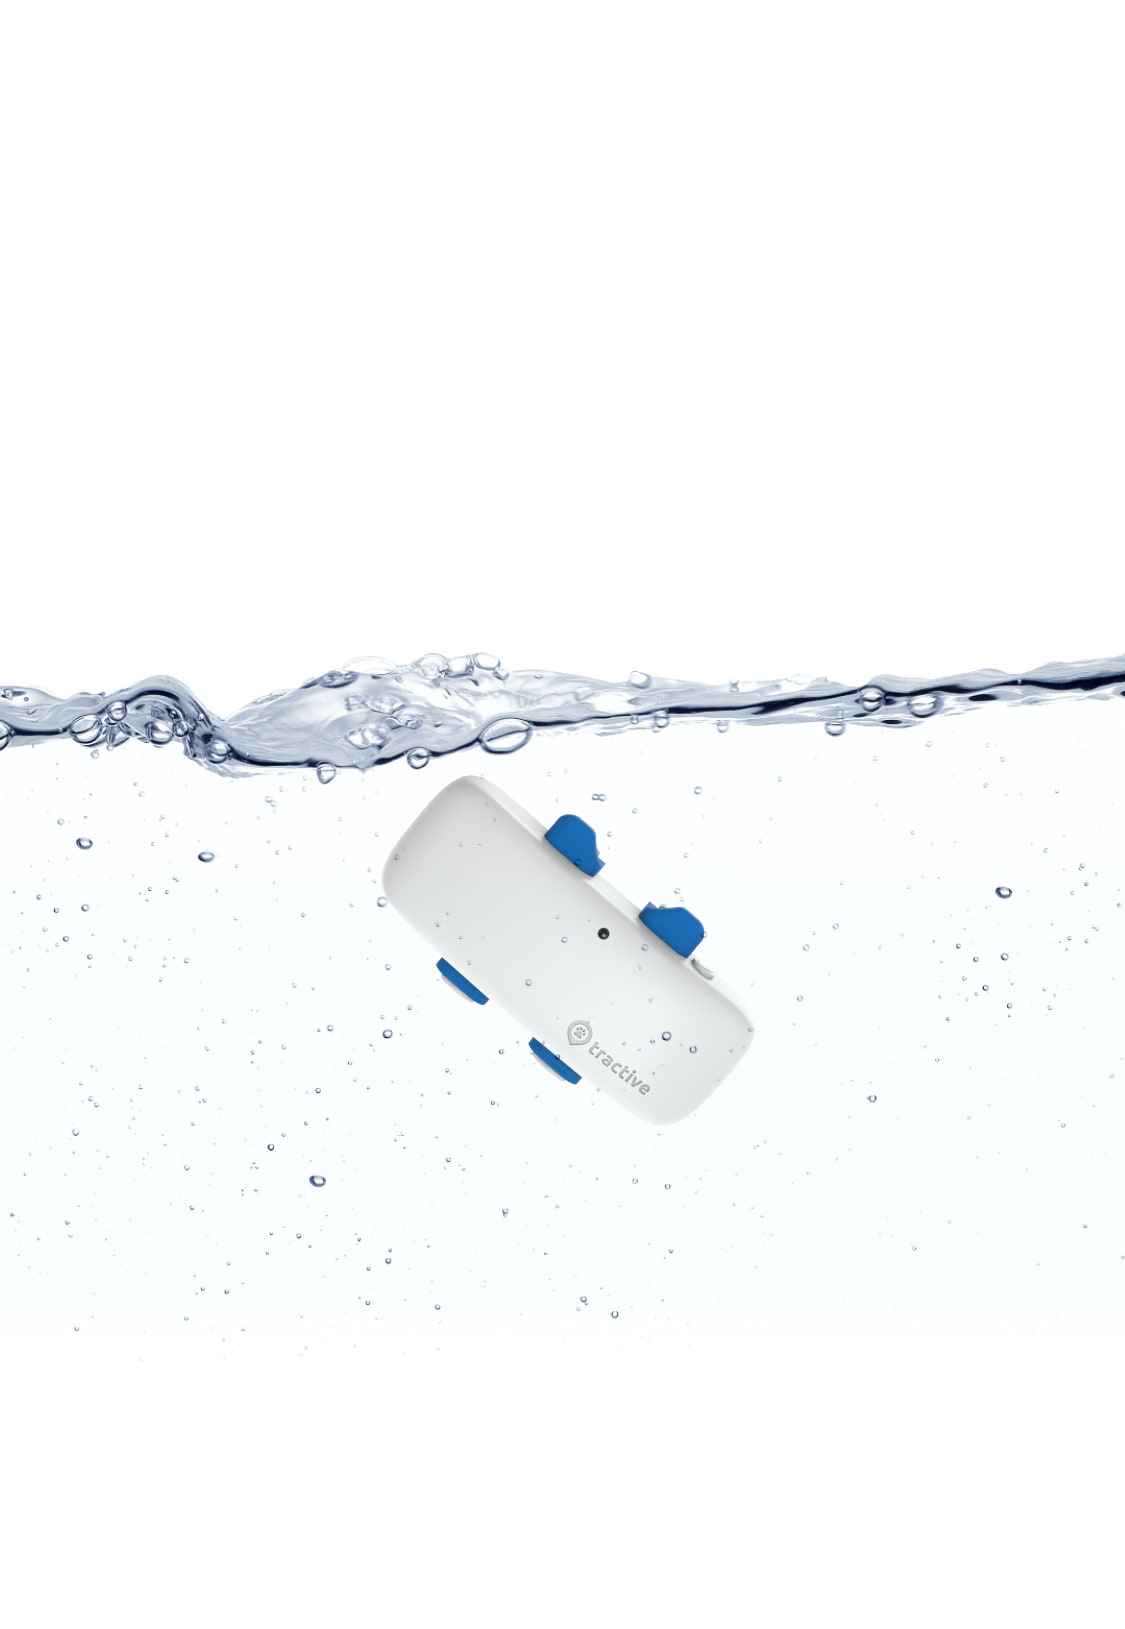 The Tractive GPS tracker under the water.